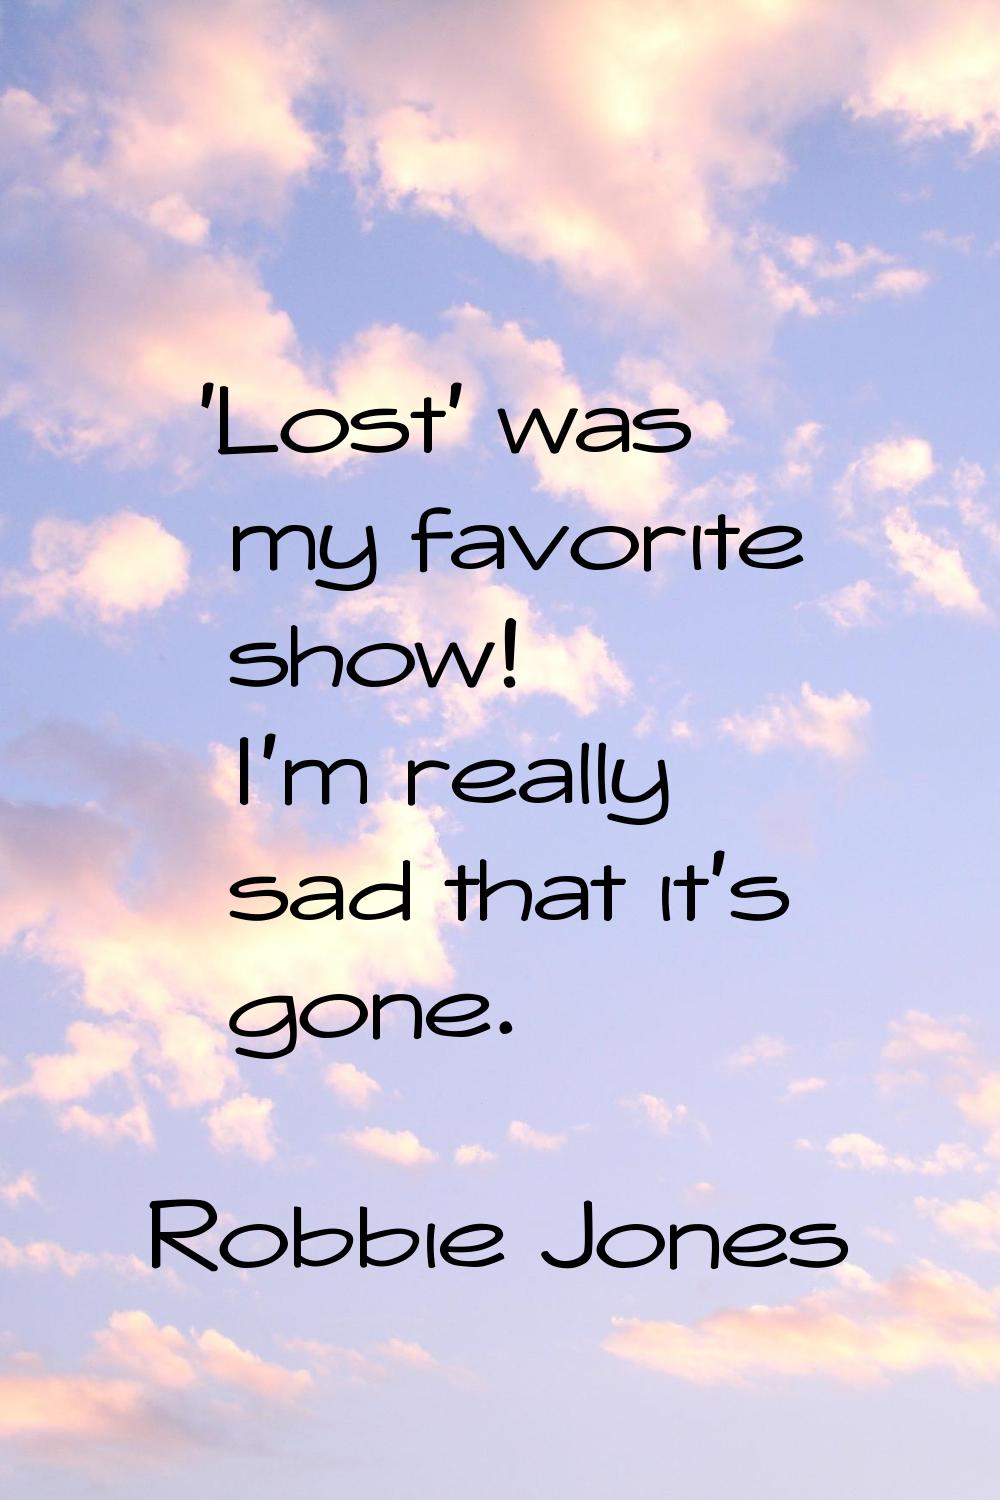 'Lost' was my favorite show! I'm really sad that it's gone.